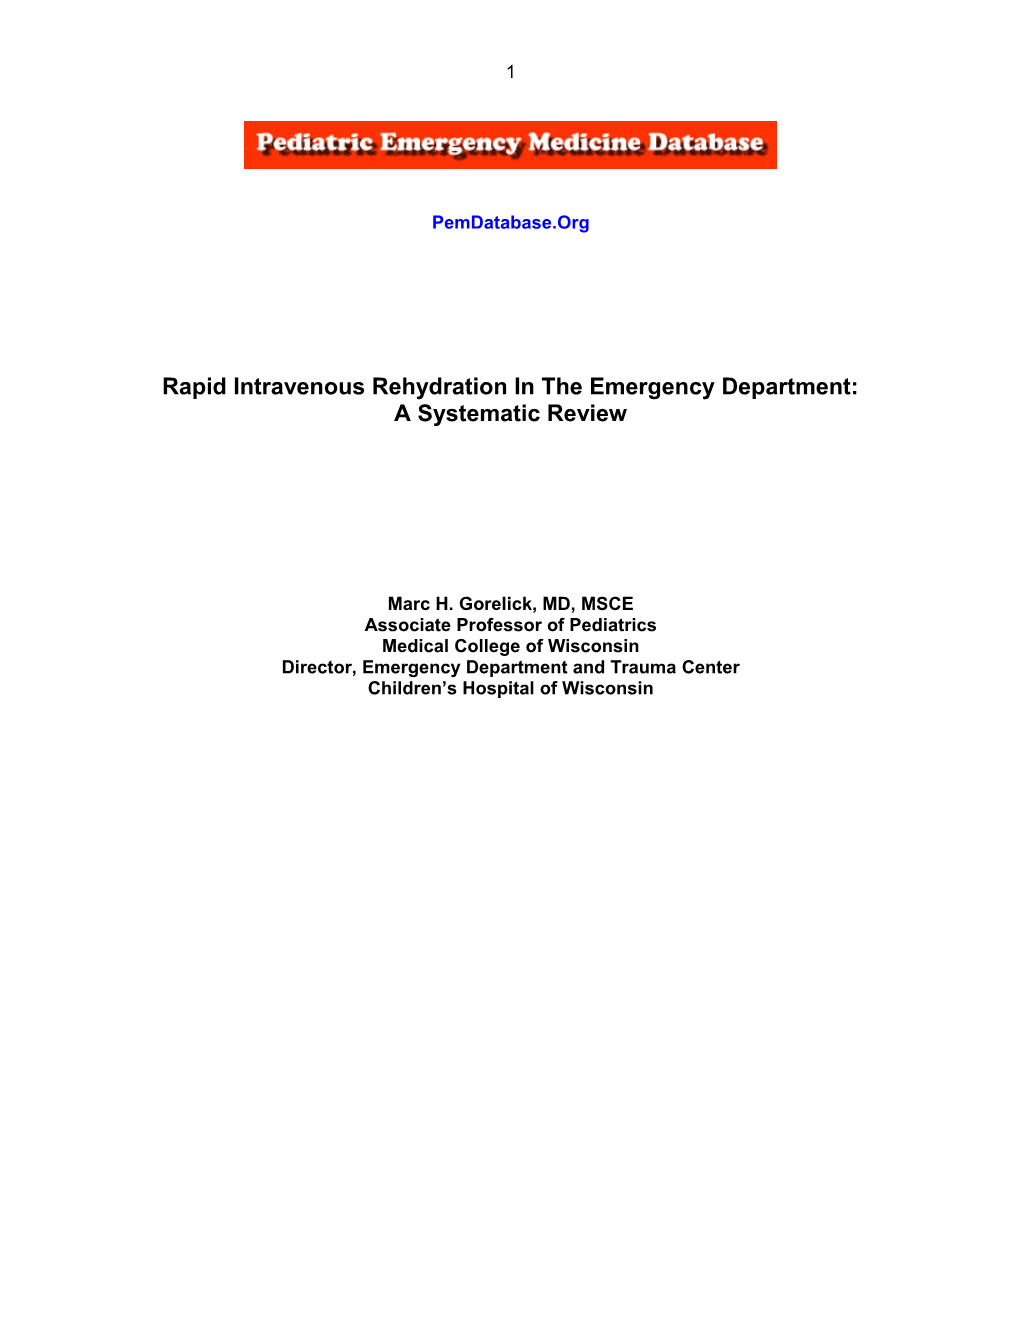 Rapid Intravenous Rehydration in the Emergency Department